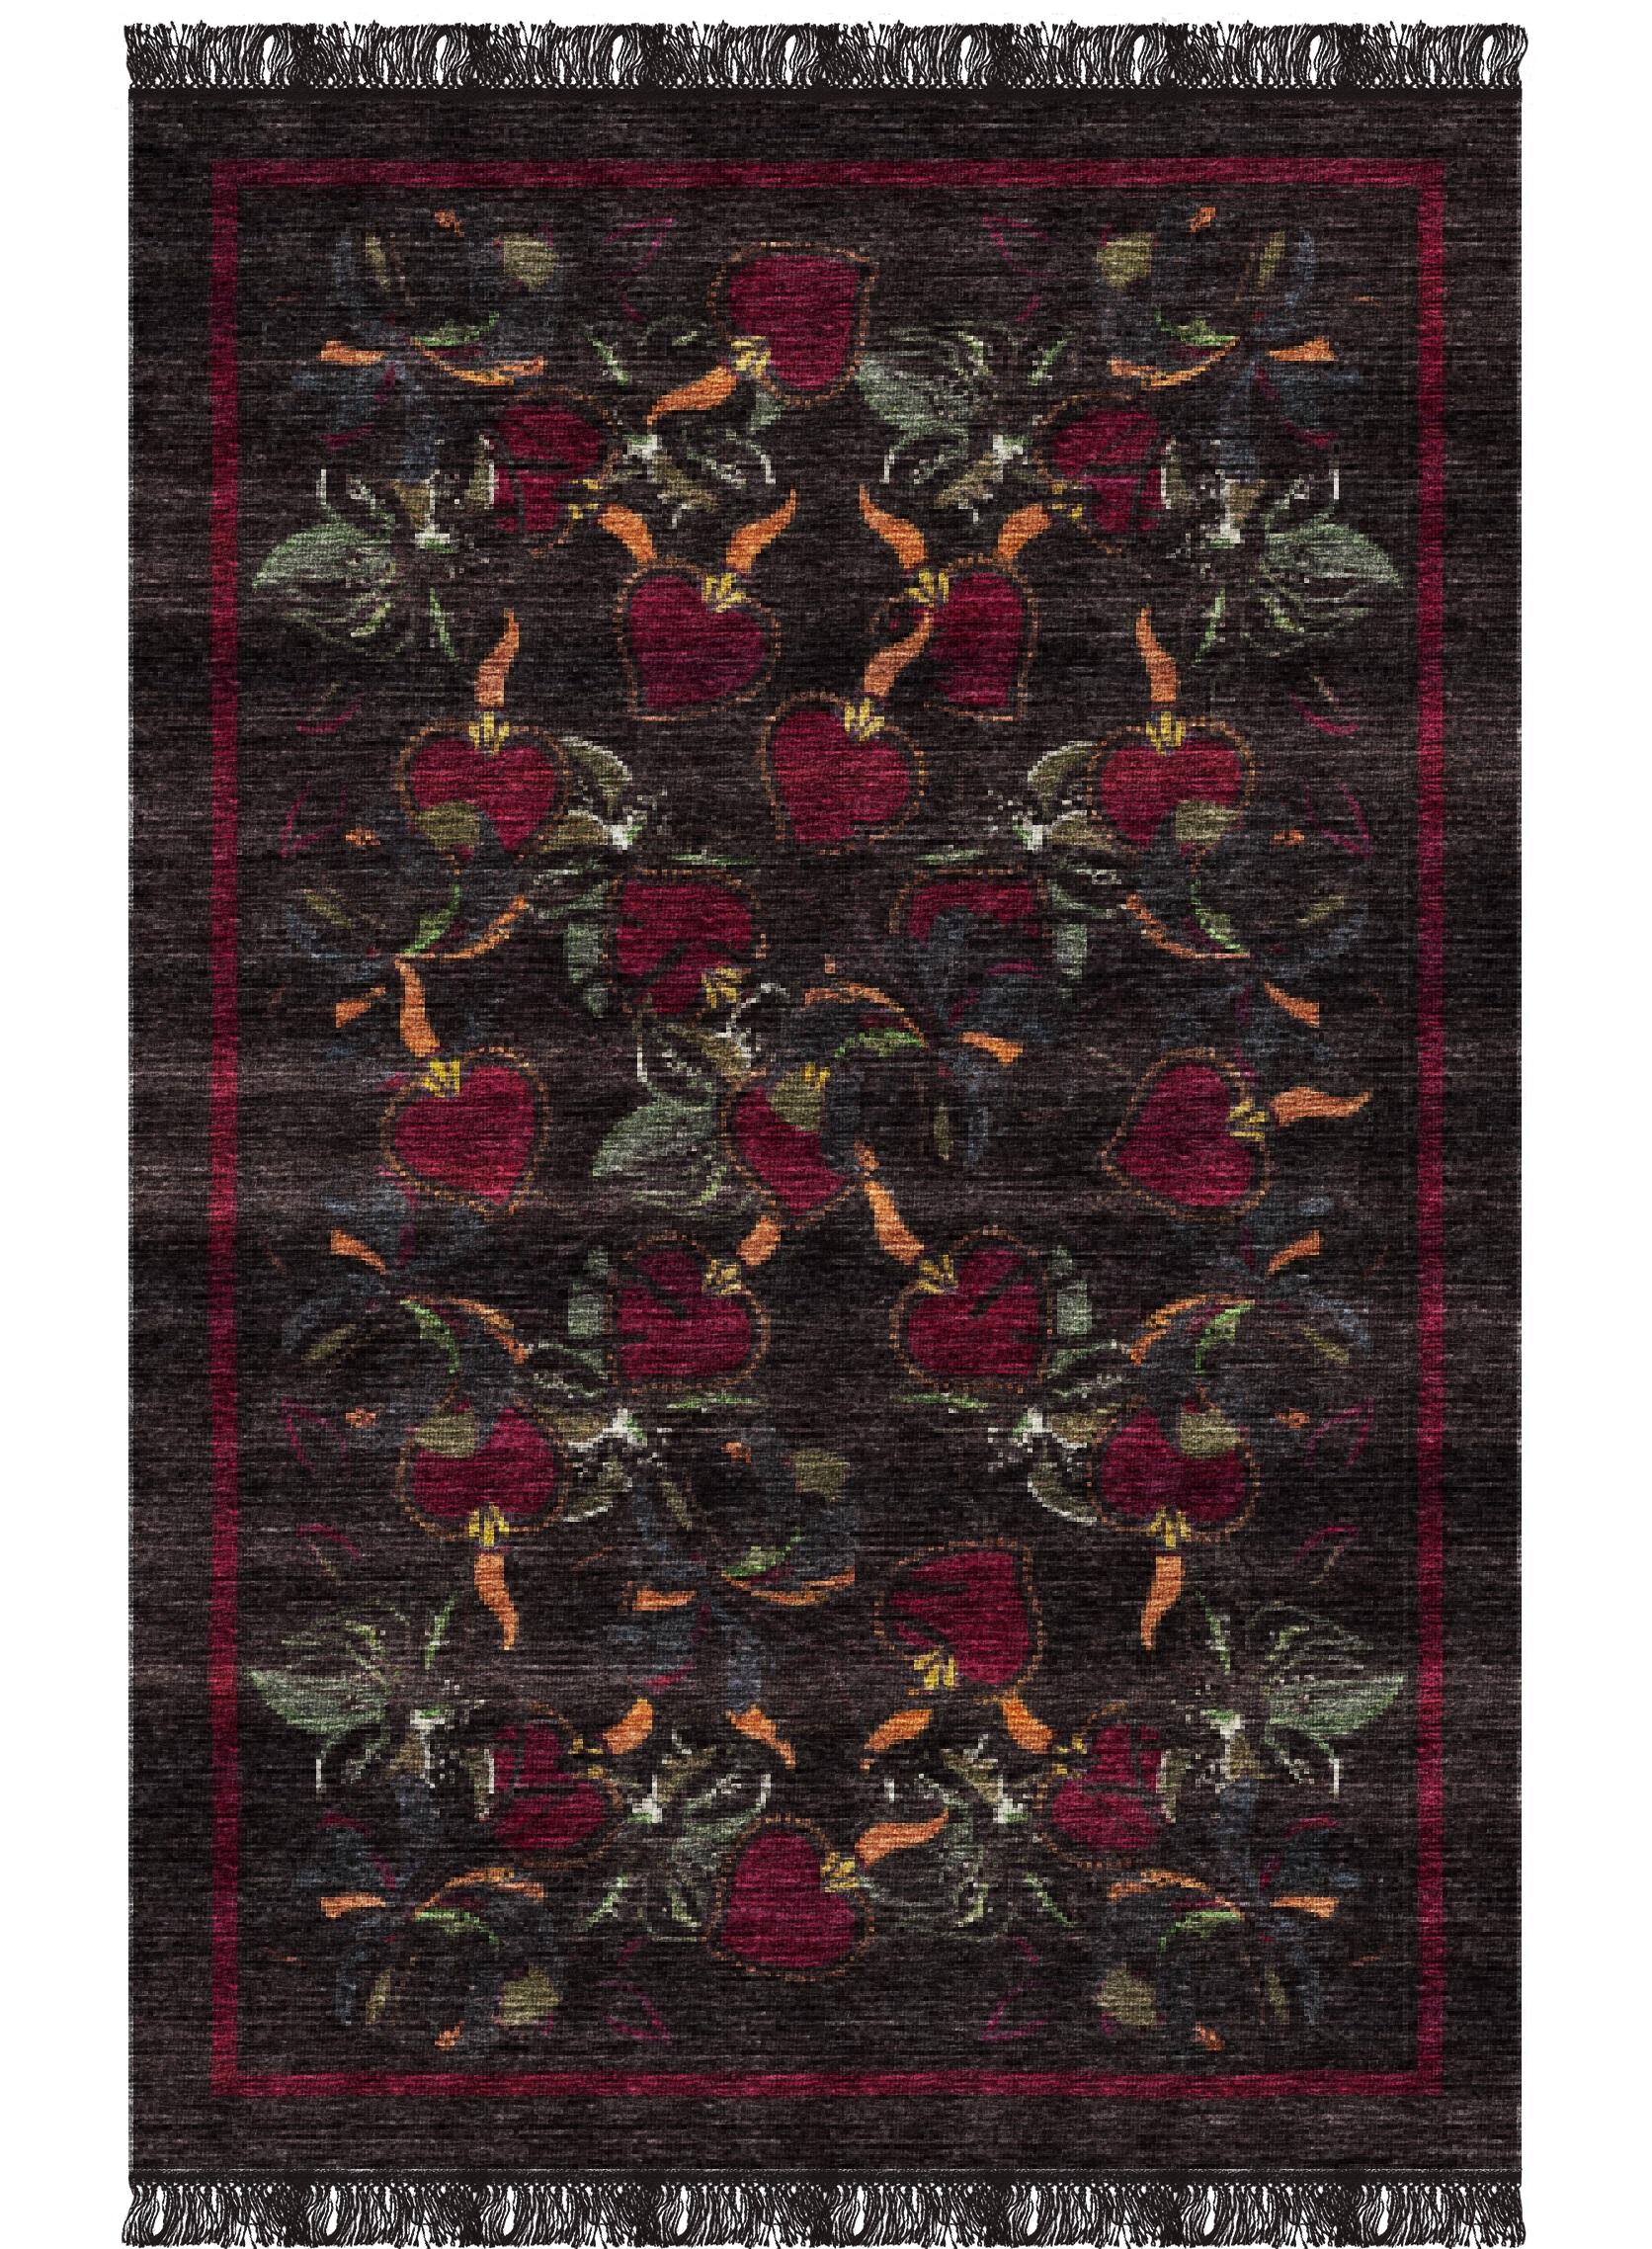 Cuori rug II by Giulio Brambilla
Dimensions: D 300 x W 200 x H 0.5 cm
Materials: NZ wool, melange yarn

Named after the Italian word for “heart“, this rug is part of a refined collection of rugs designed by Giulio Brambilla that are hand woven